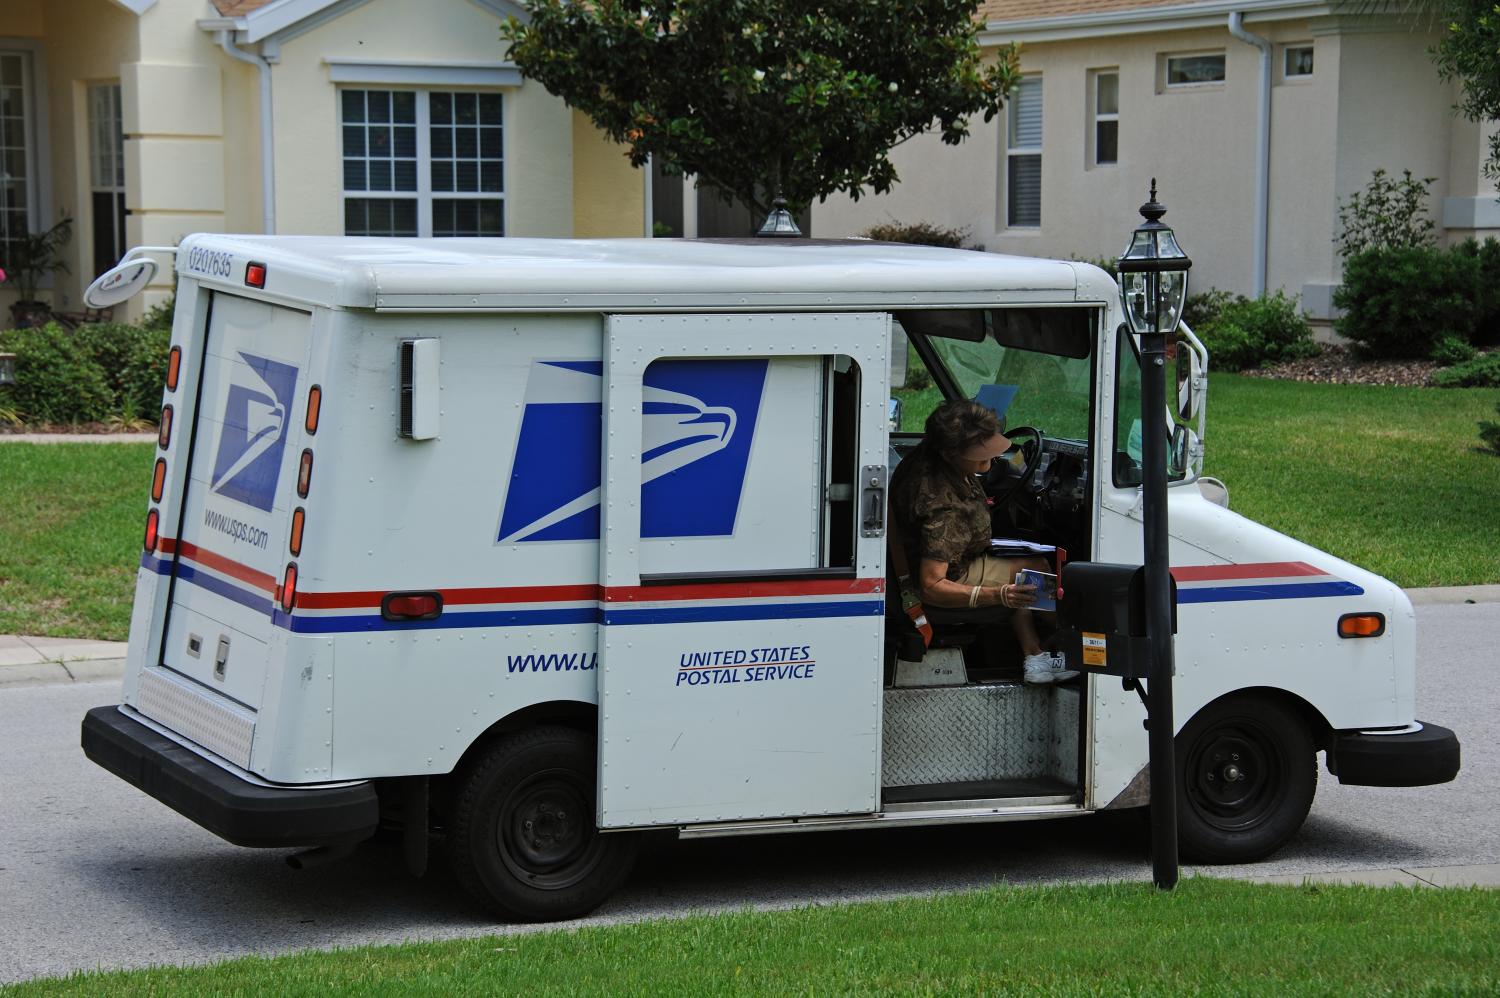 US POST VEHICLE IN SUMMERFIELD FLORIDA USA - CIRCA 2014 -United States Postal Service collection and delivery van on a residential complex in Summerfield Florida USA